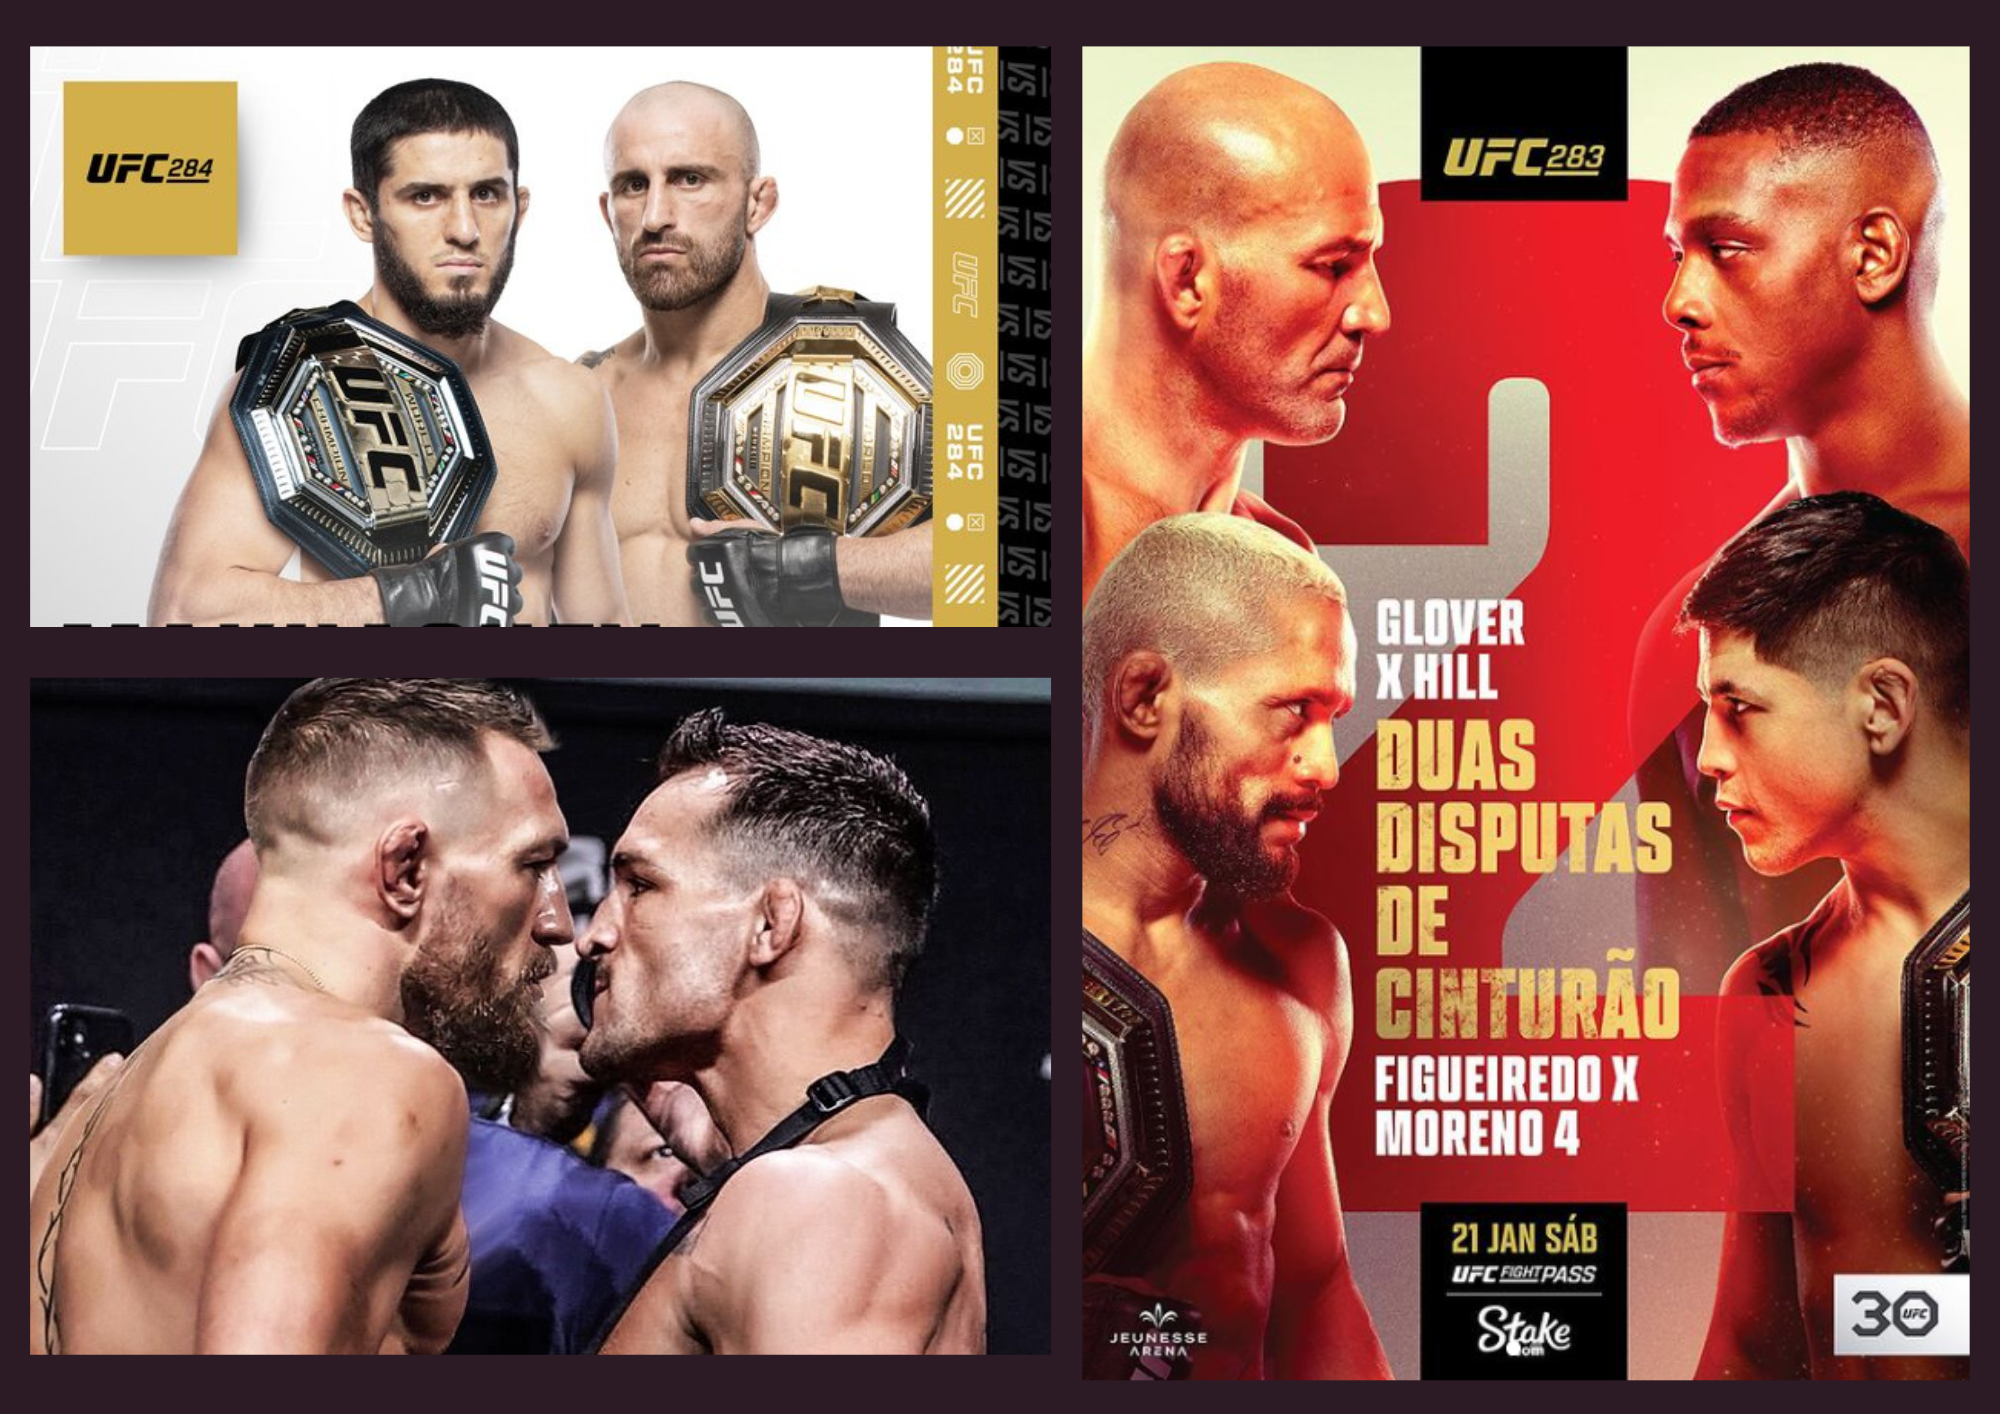 UFC 2023 schedule What are the major UFC Battles happening in 2023? Check FULL UFC Schedule for 2023